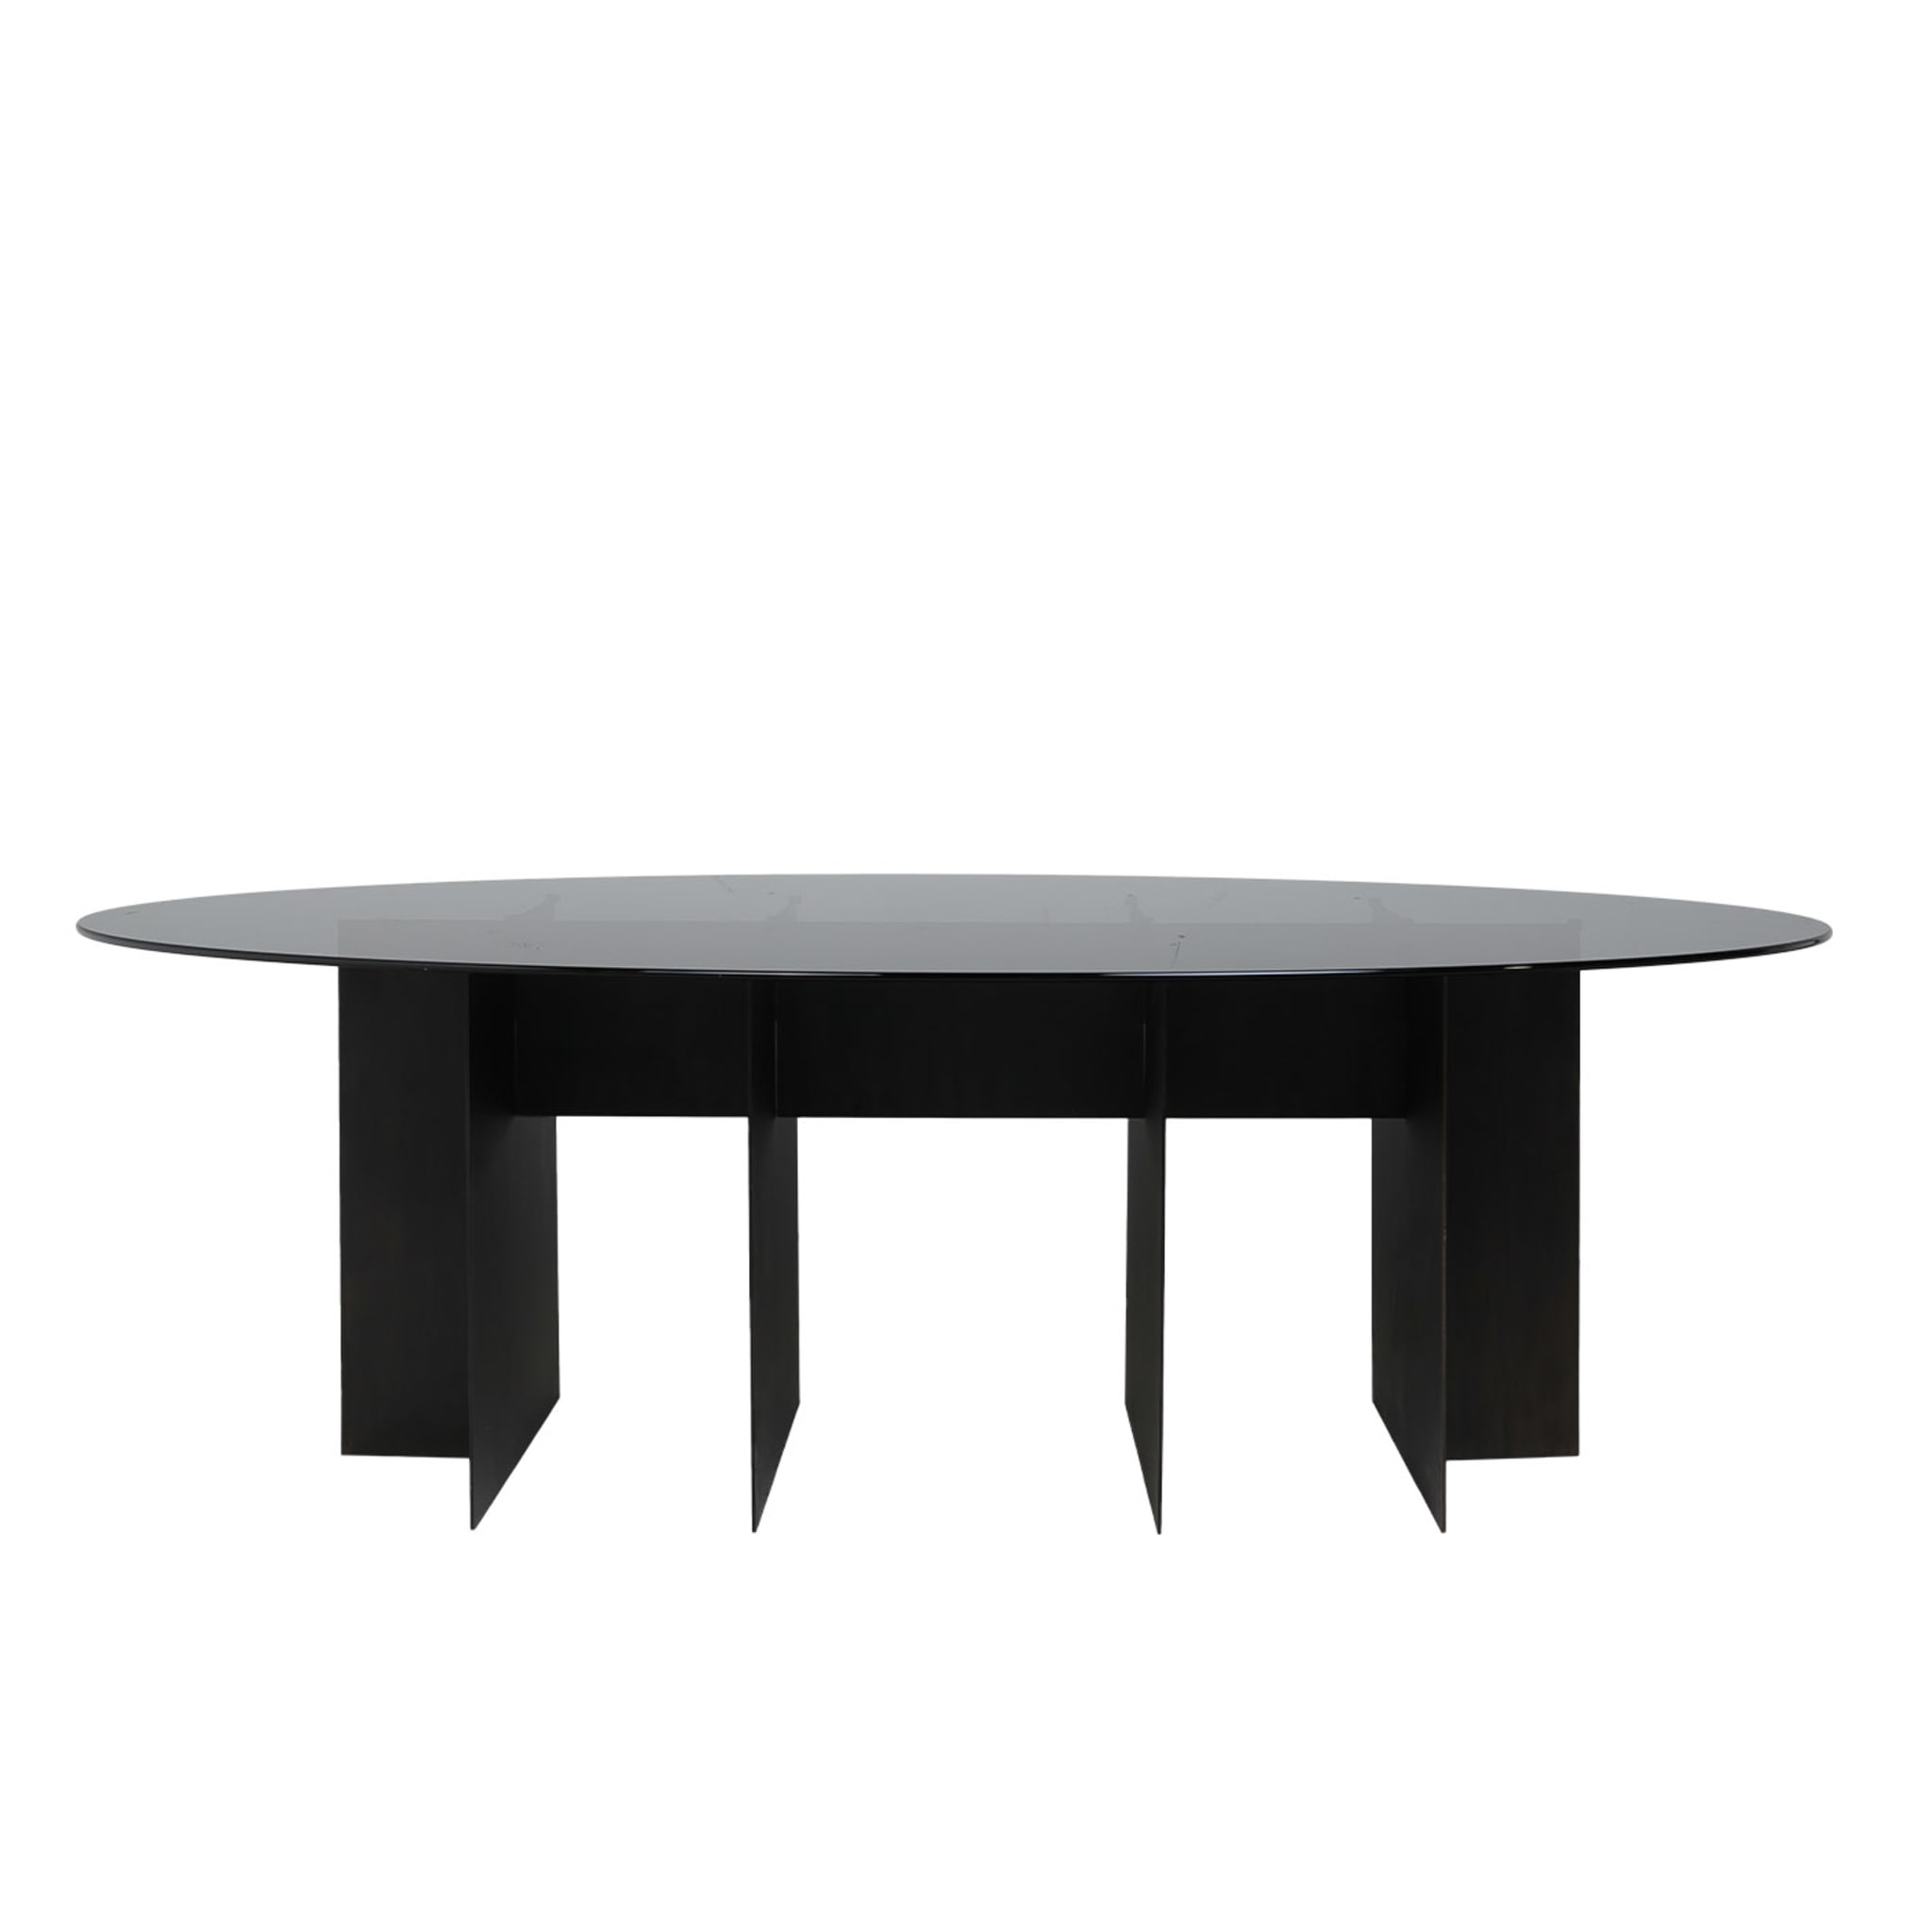 Roy Oval Black Dining Table by Filippo Montaina - Alternative view 5